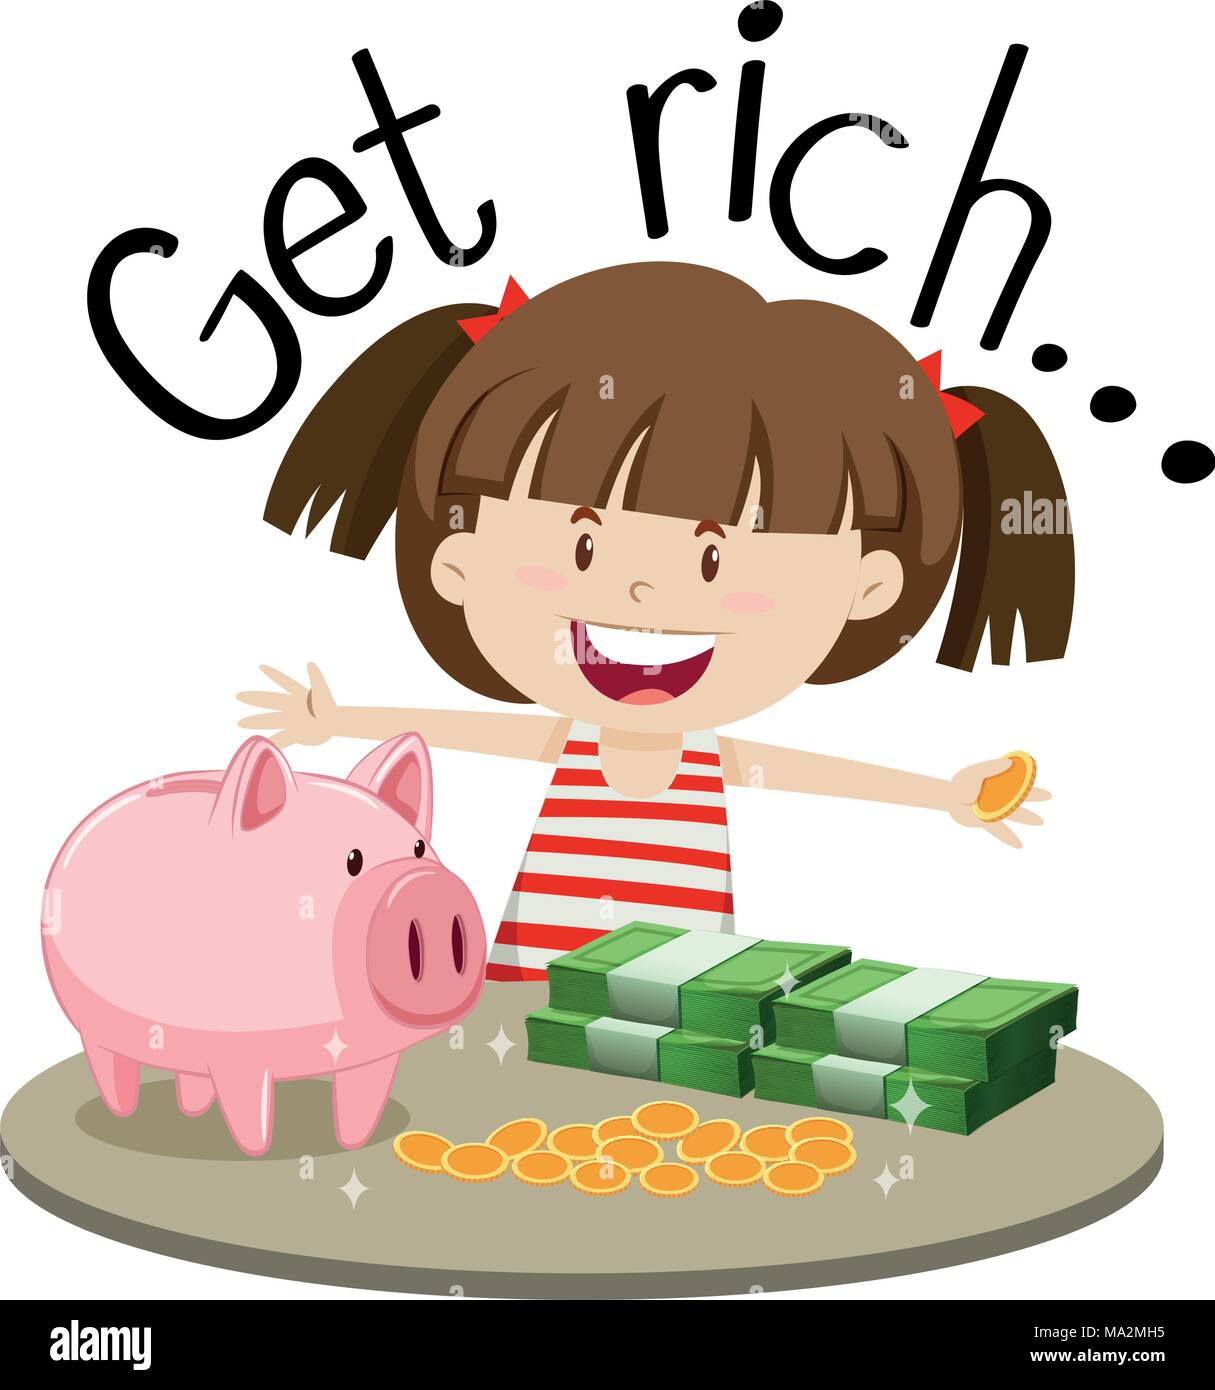 English phrase for get rich with girl and money on table illustration Stock Vector